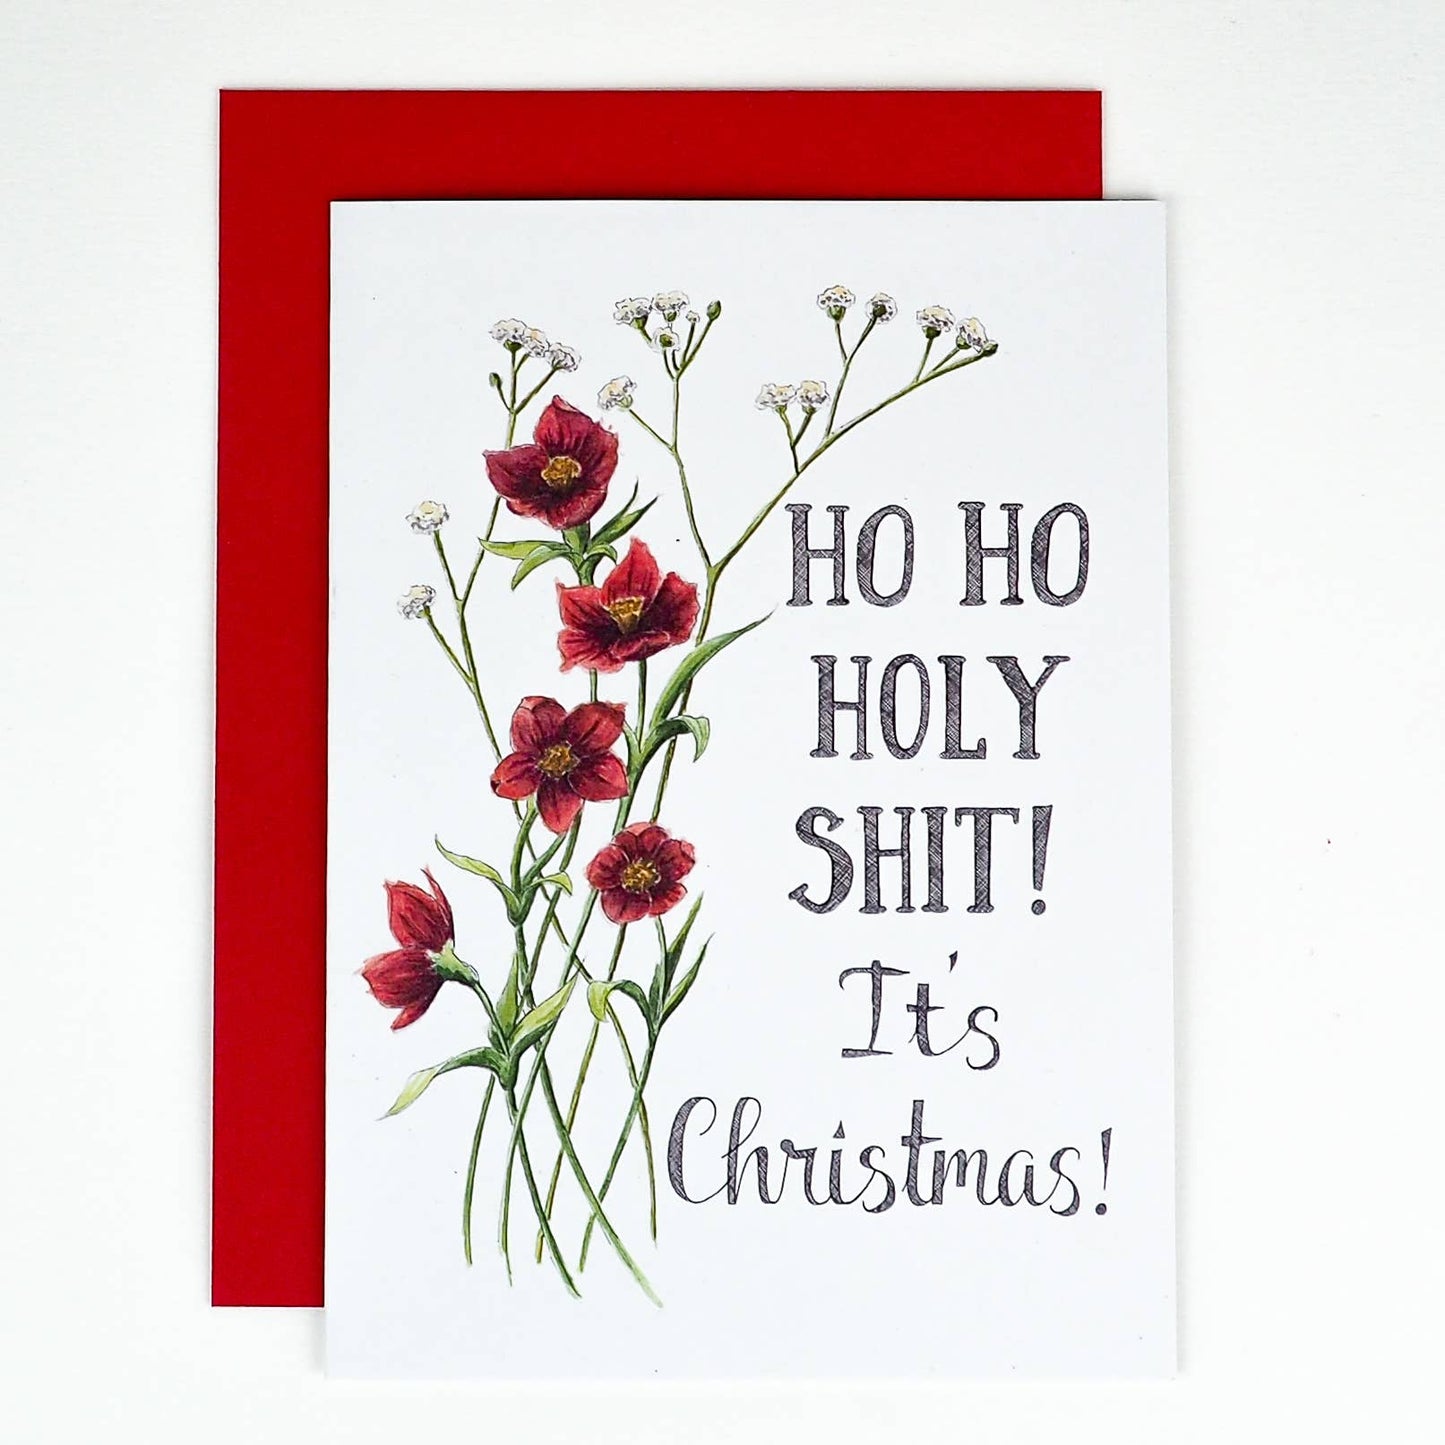 Ho Ho Holy Shit! It's Christmas Card - Naughty Florals